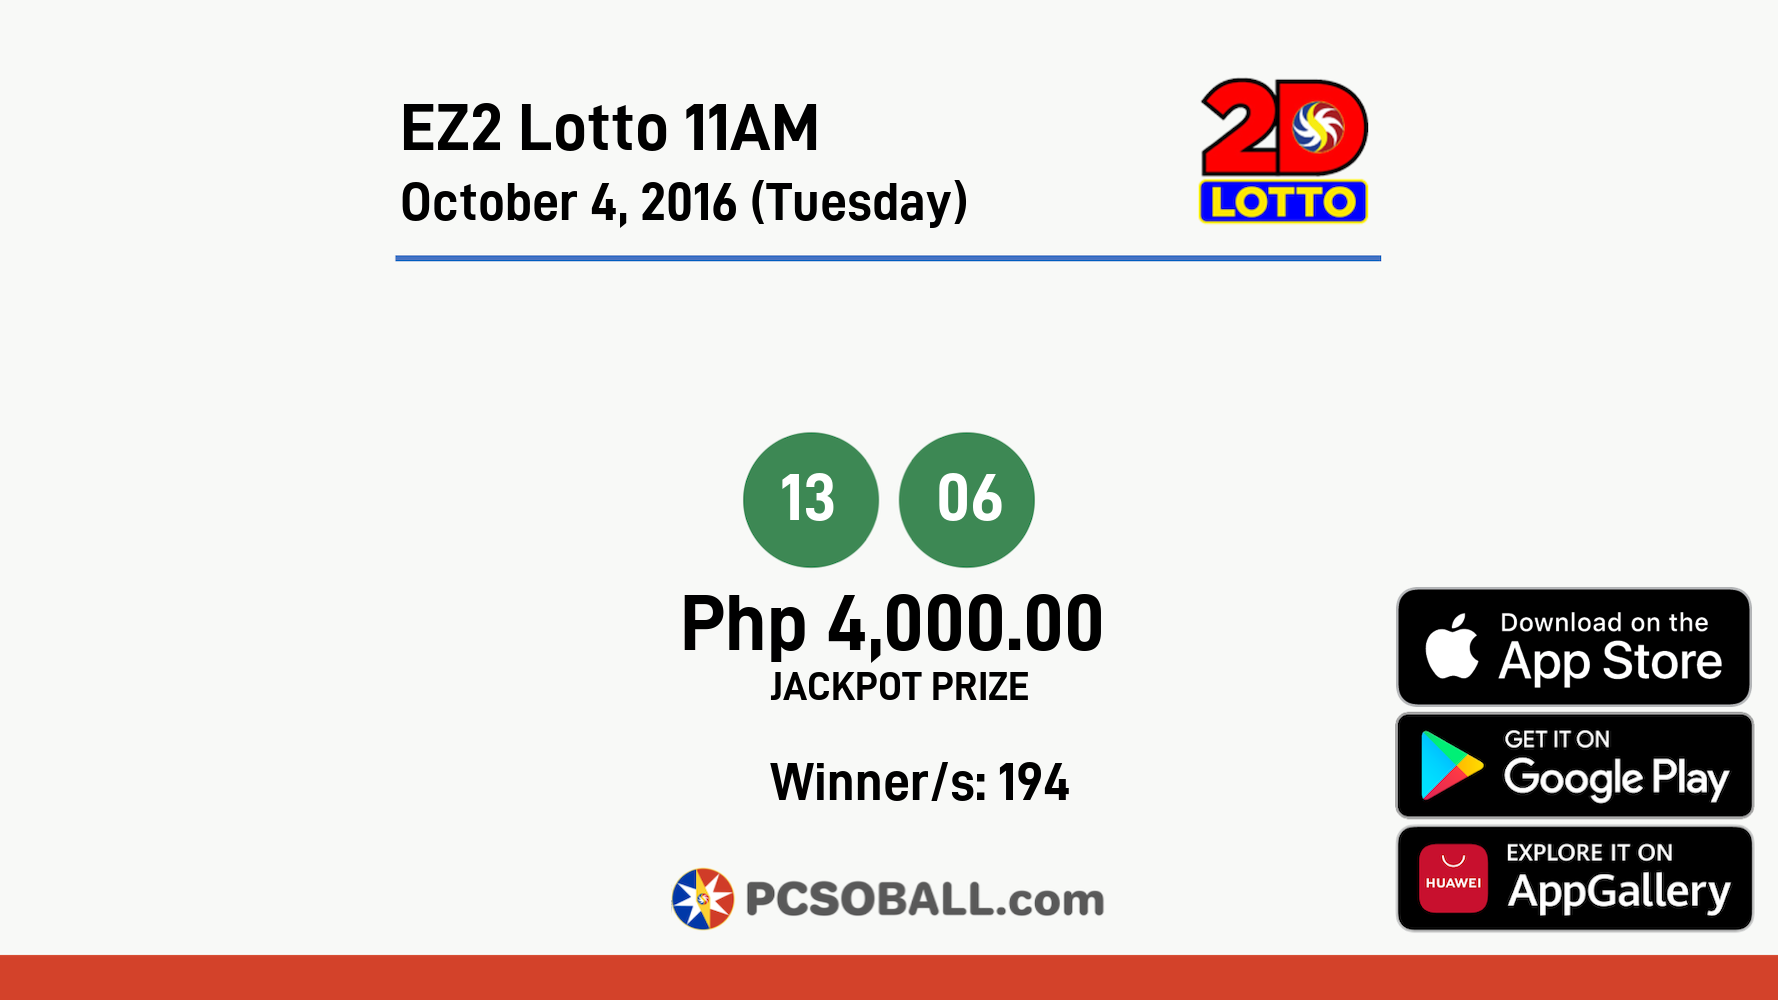 EZ2 Lotto 11AM October 4, 2016 (Tuesday) Result